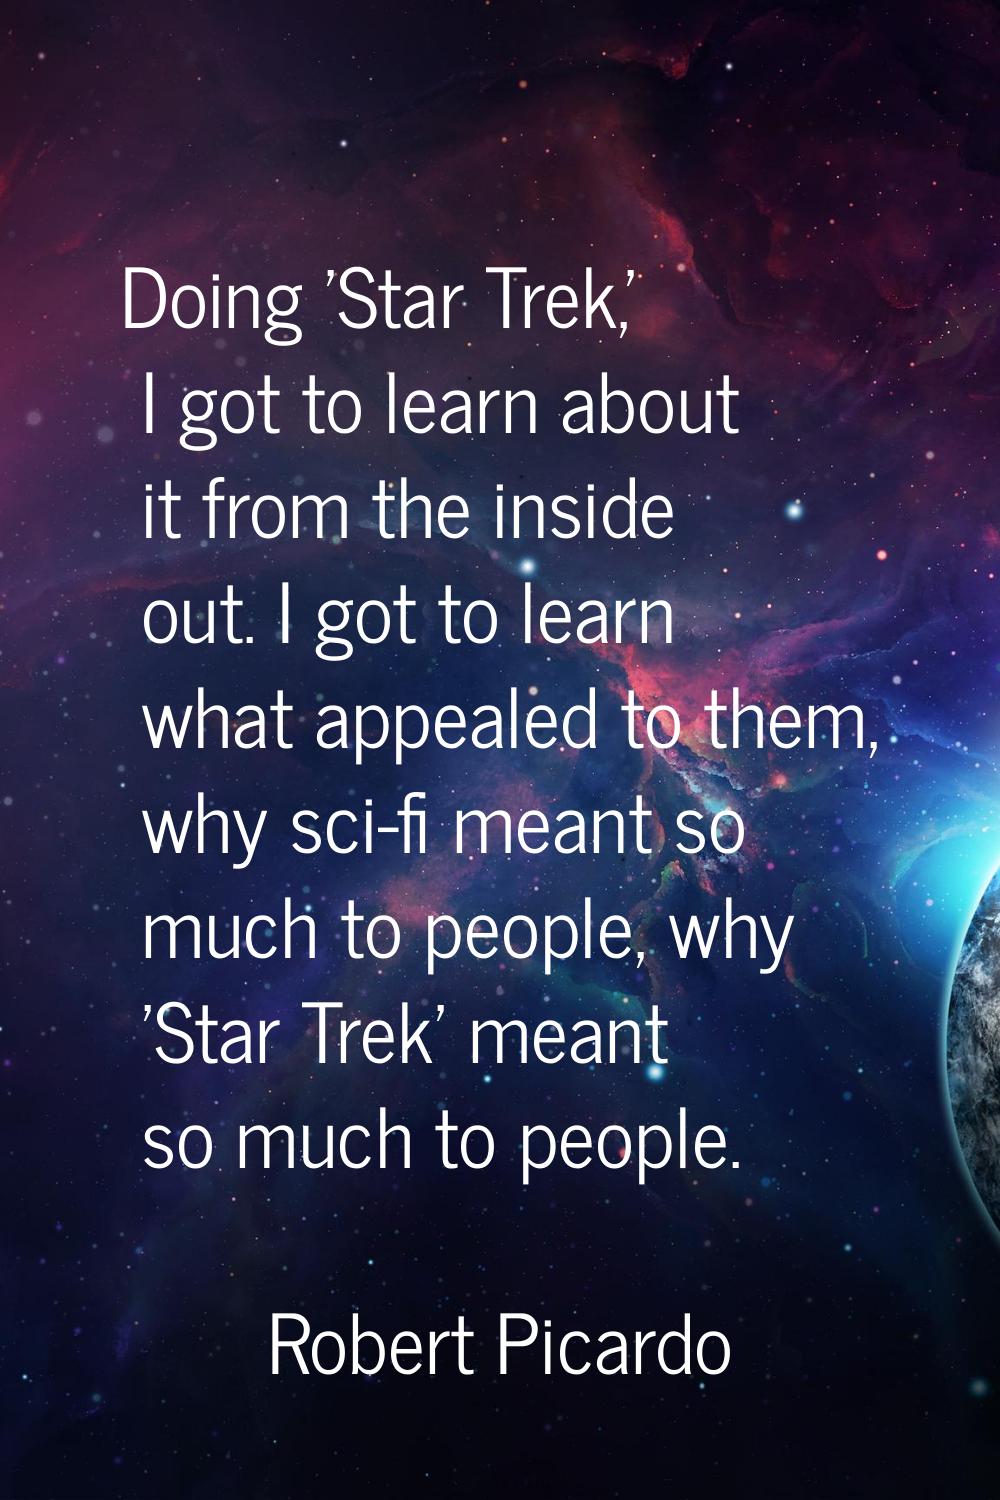 Doing 'Star Trek,' I got to learn about it from the inside out. I got to learn what appealed to the